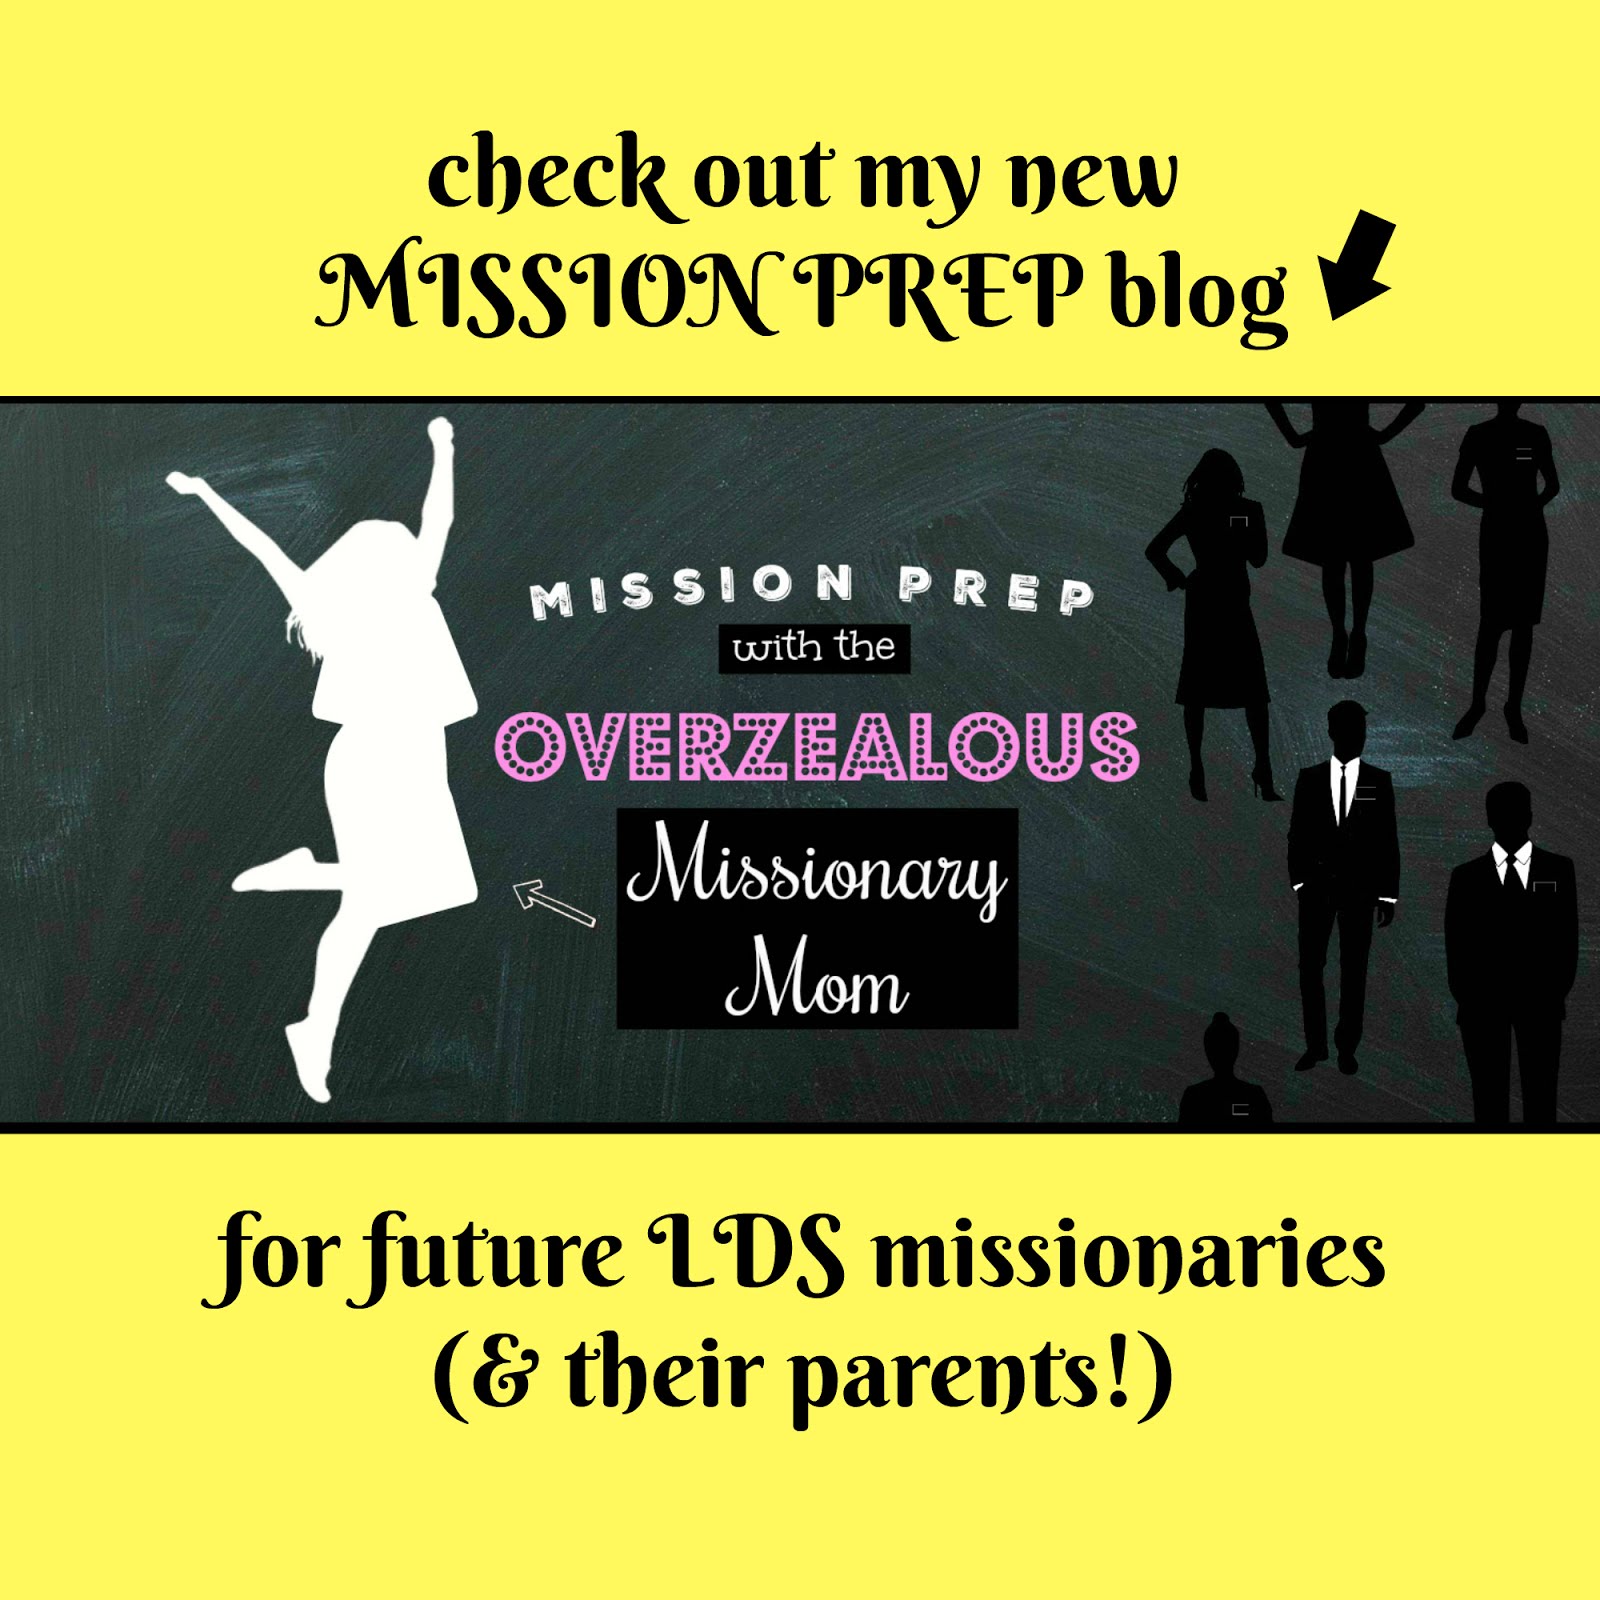 See our companion blog especially for FUTURE LDS Missionaries & their parents